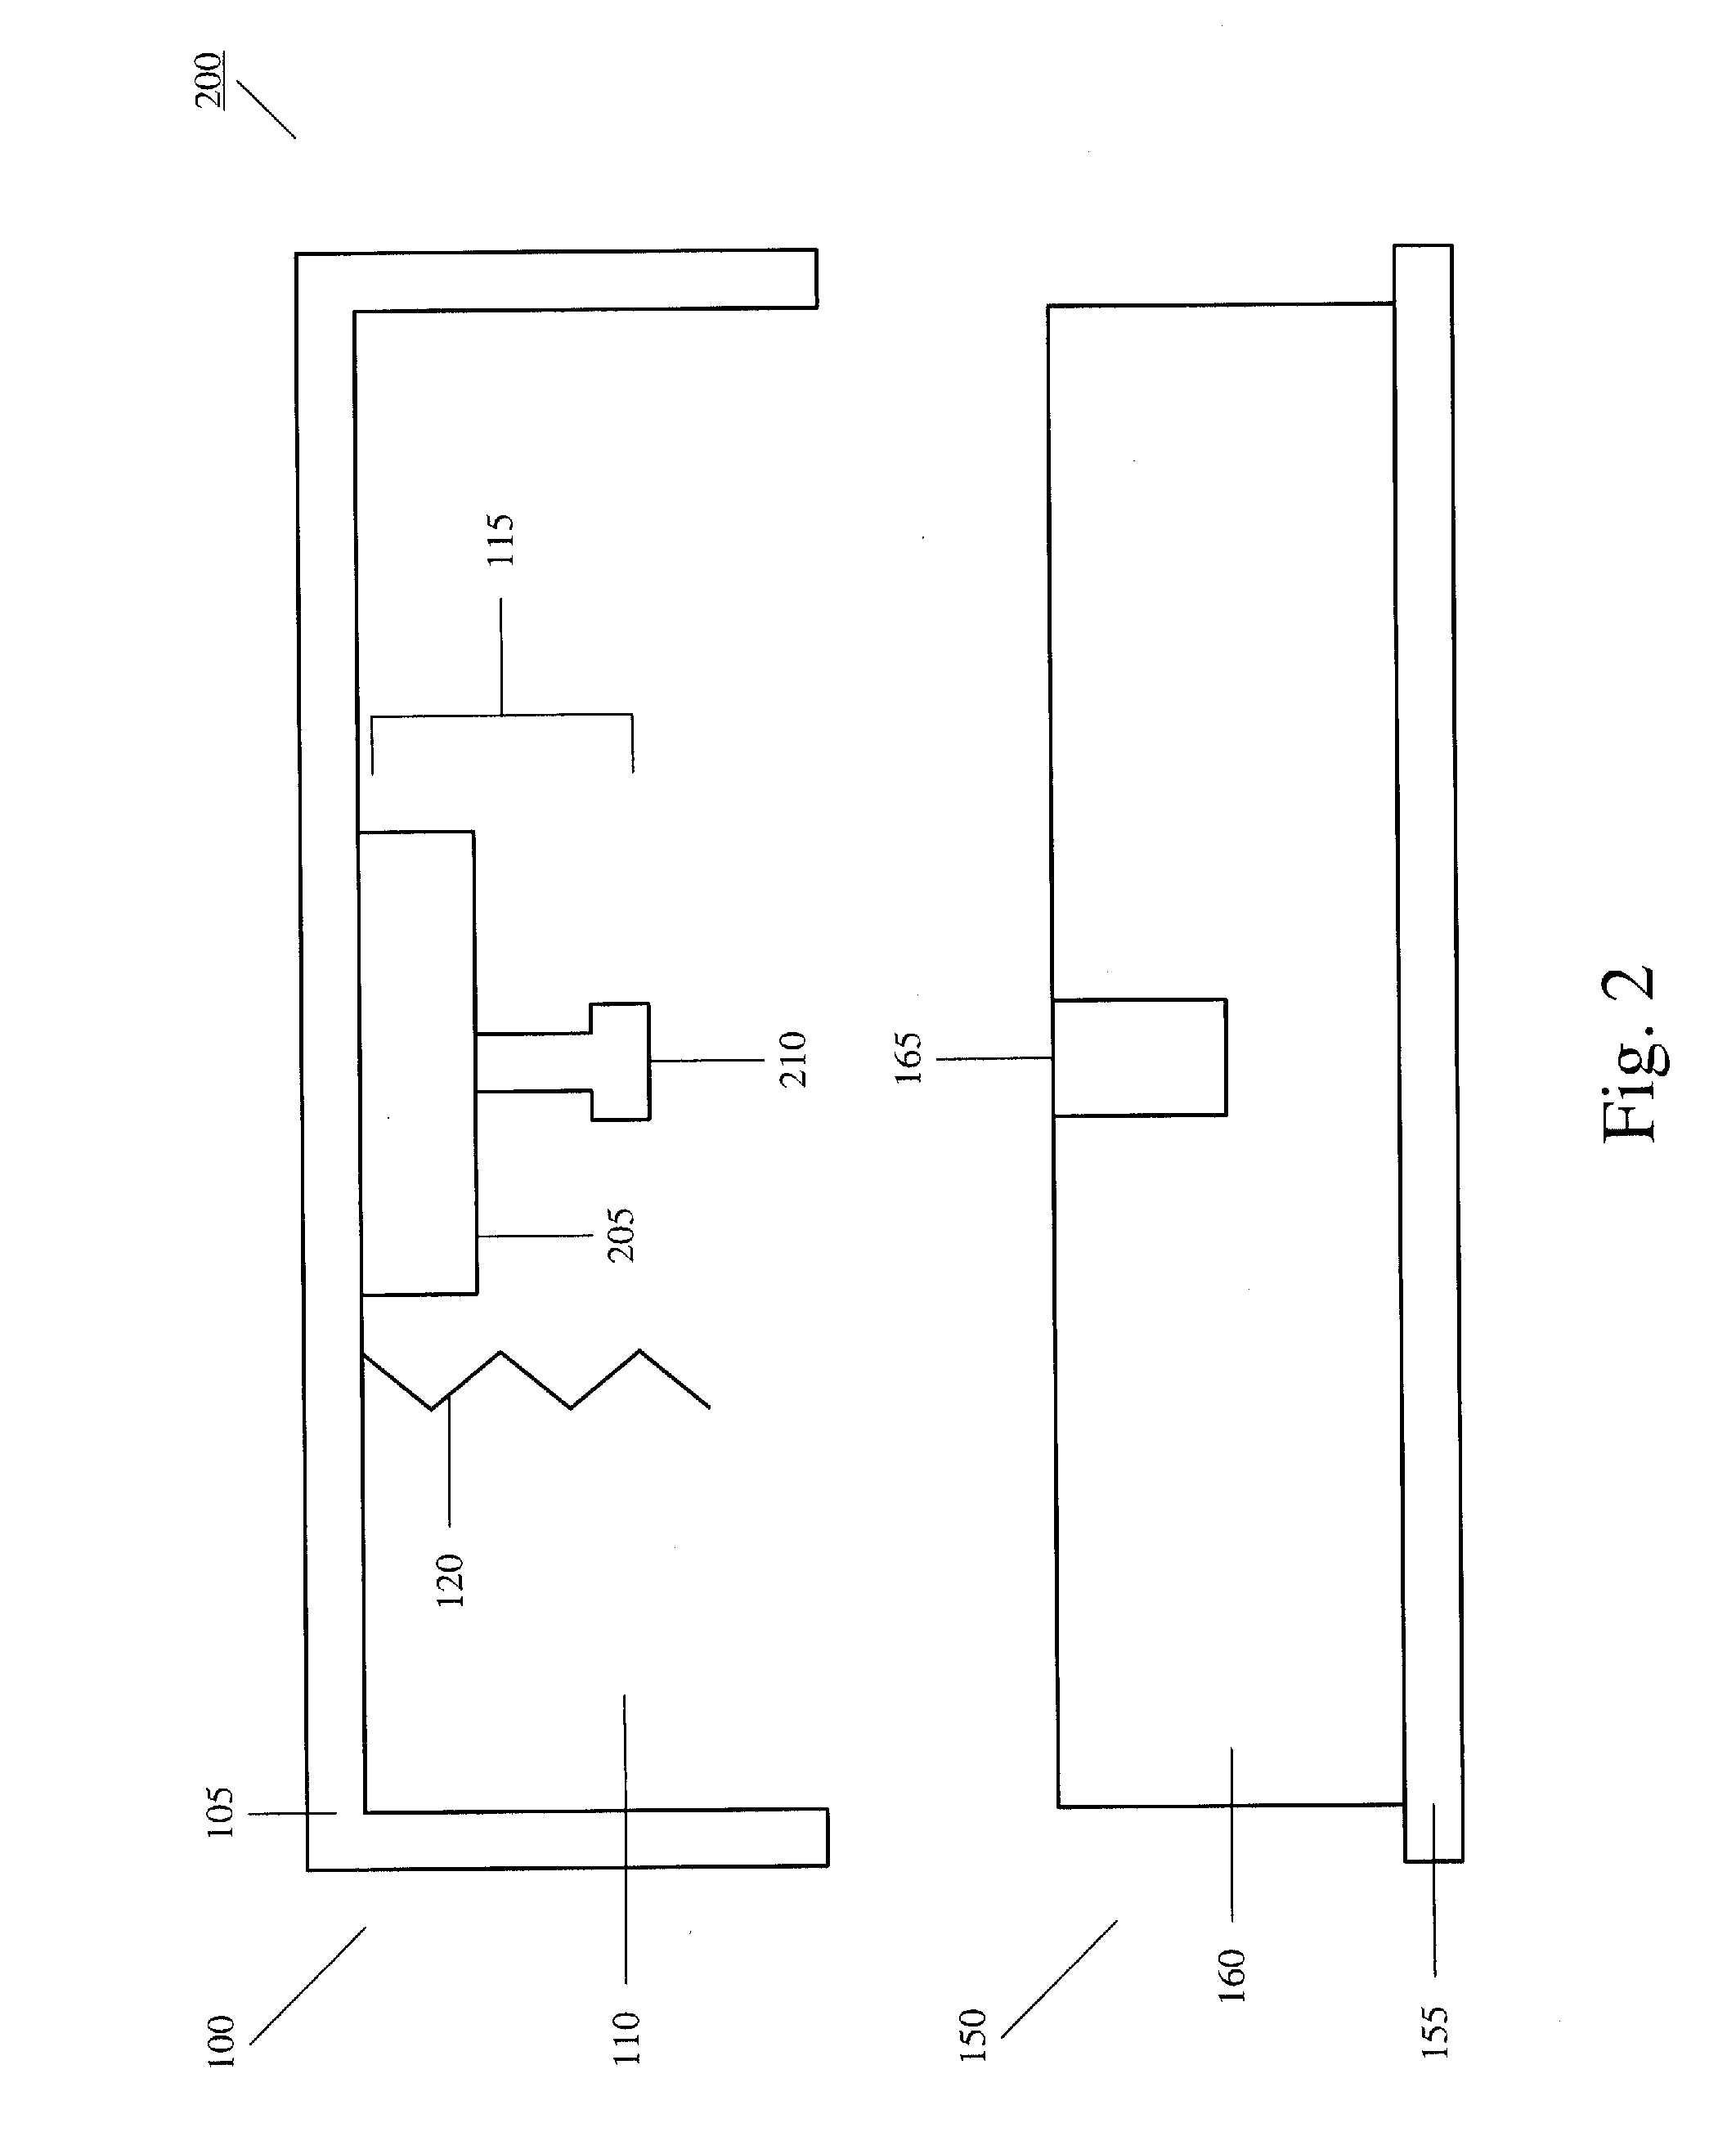 System and Method for an Automated Battery Arrangement